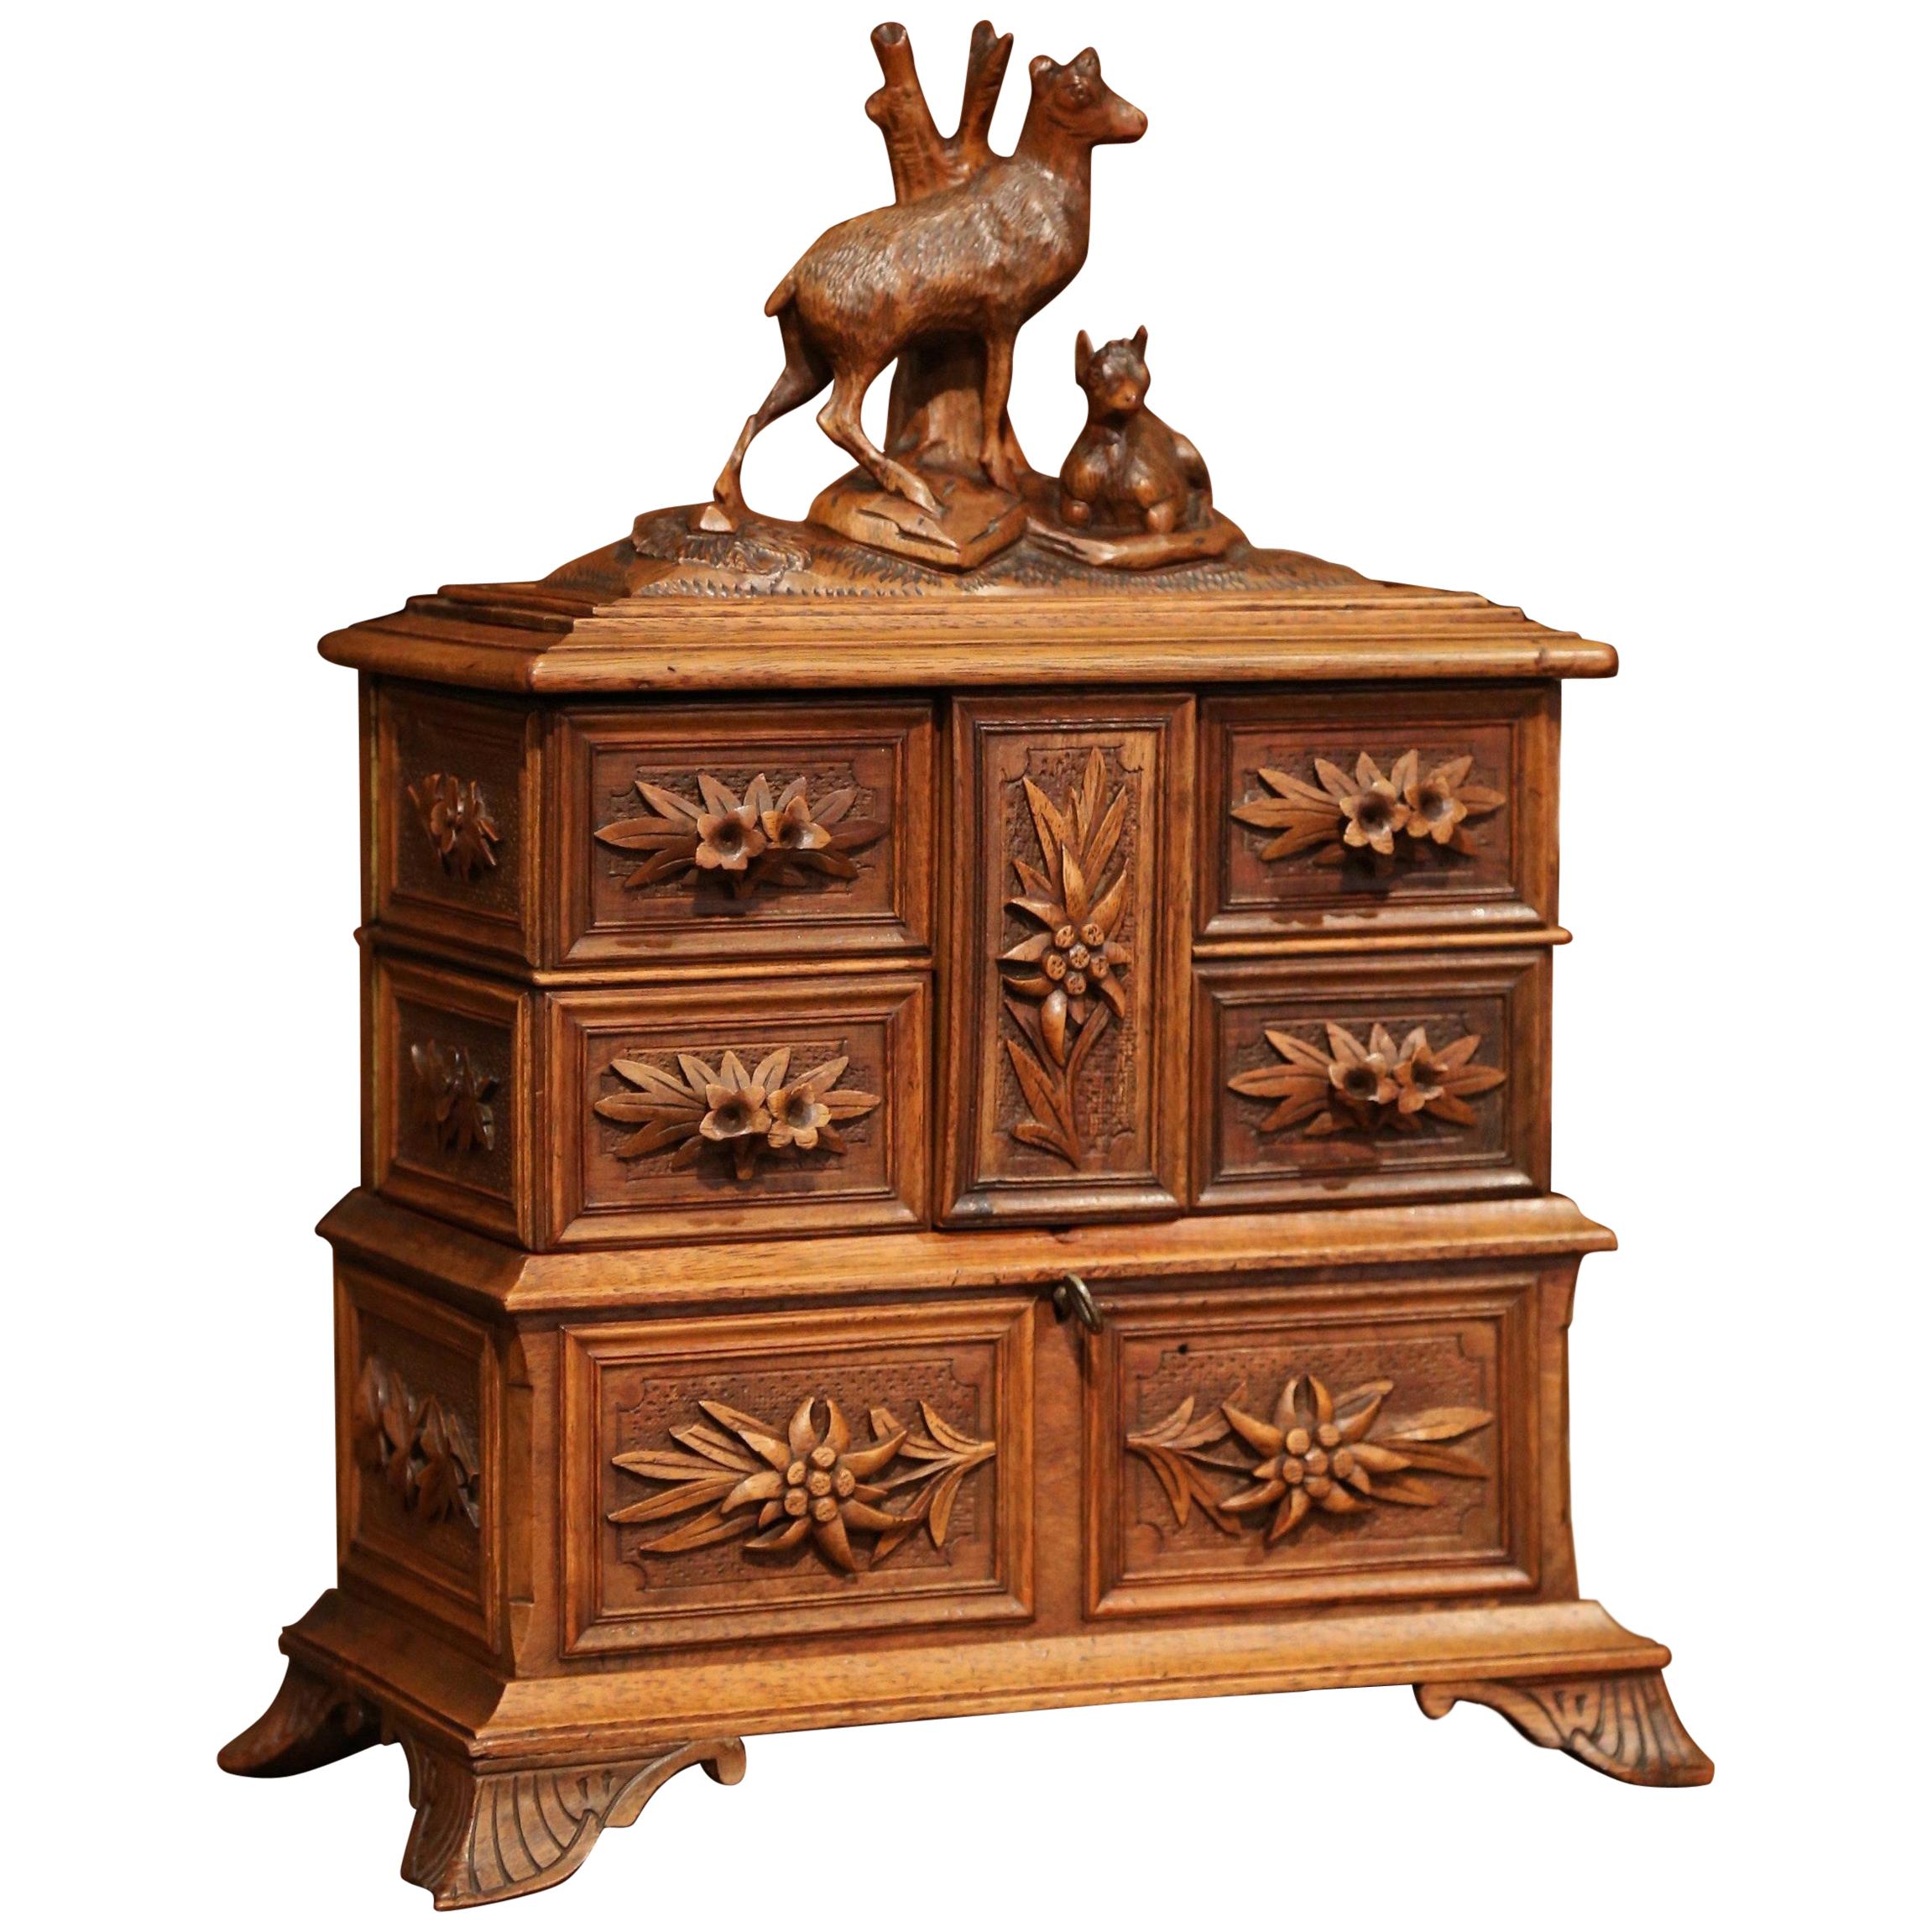 19th Century French Black Forest Carved Walnut Jewelry Box with Deer and Drawers